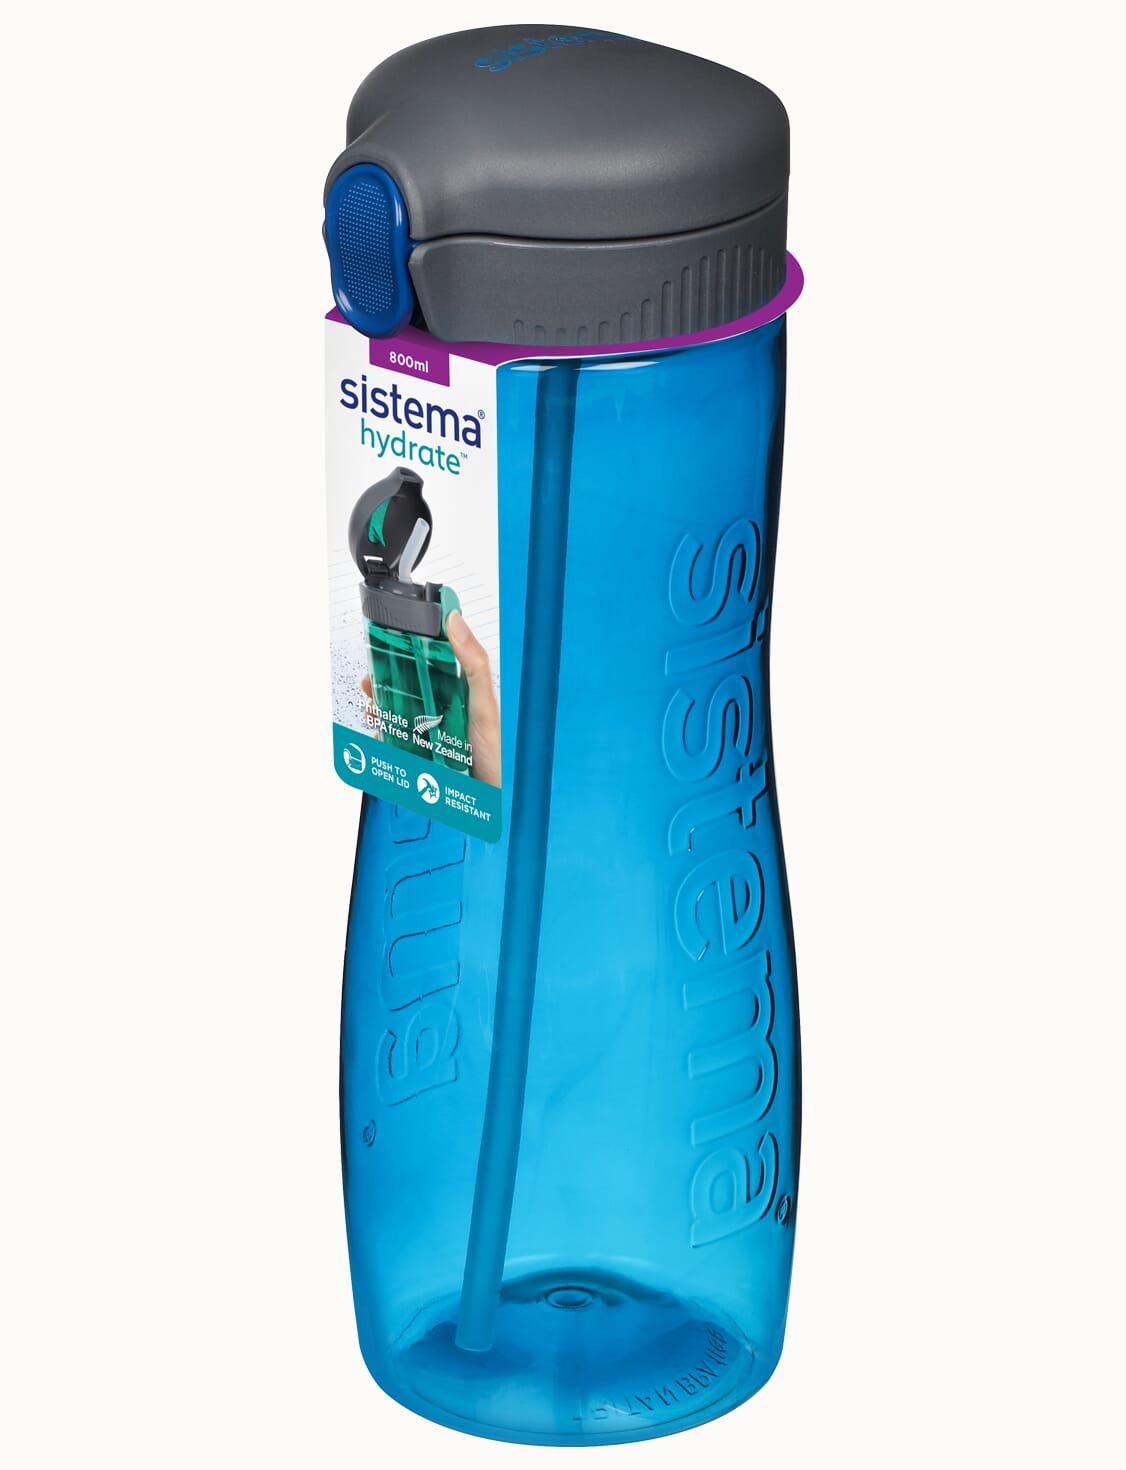 New kids water bottle With Built In Snack Compartment - Drinkware